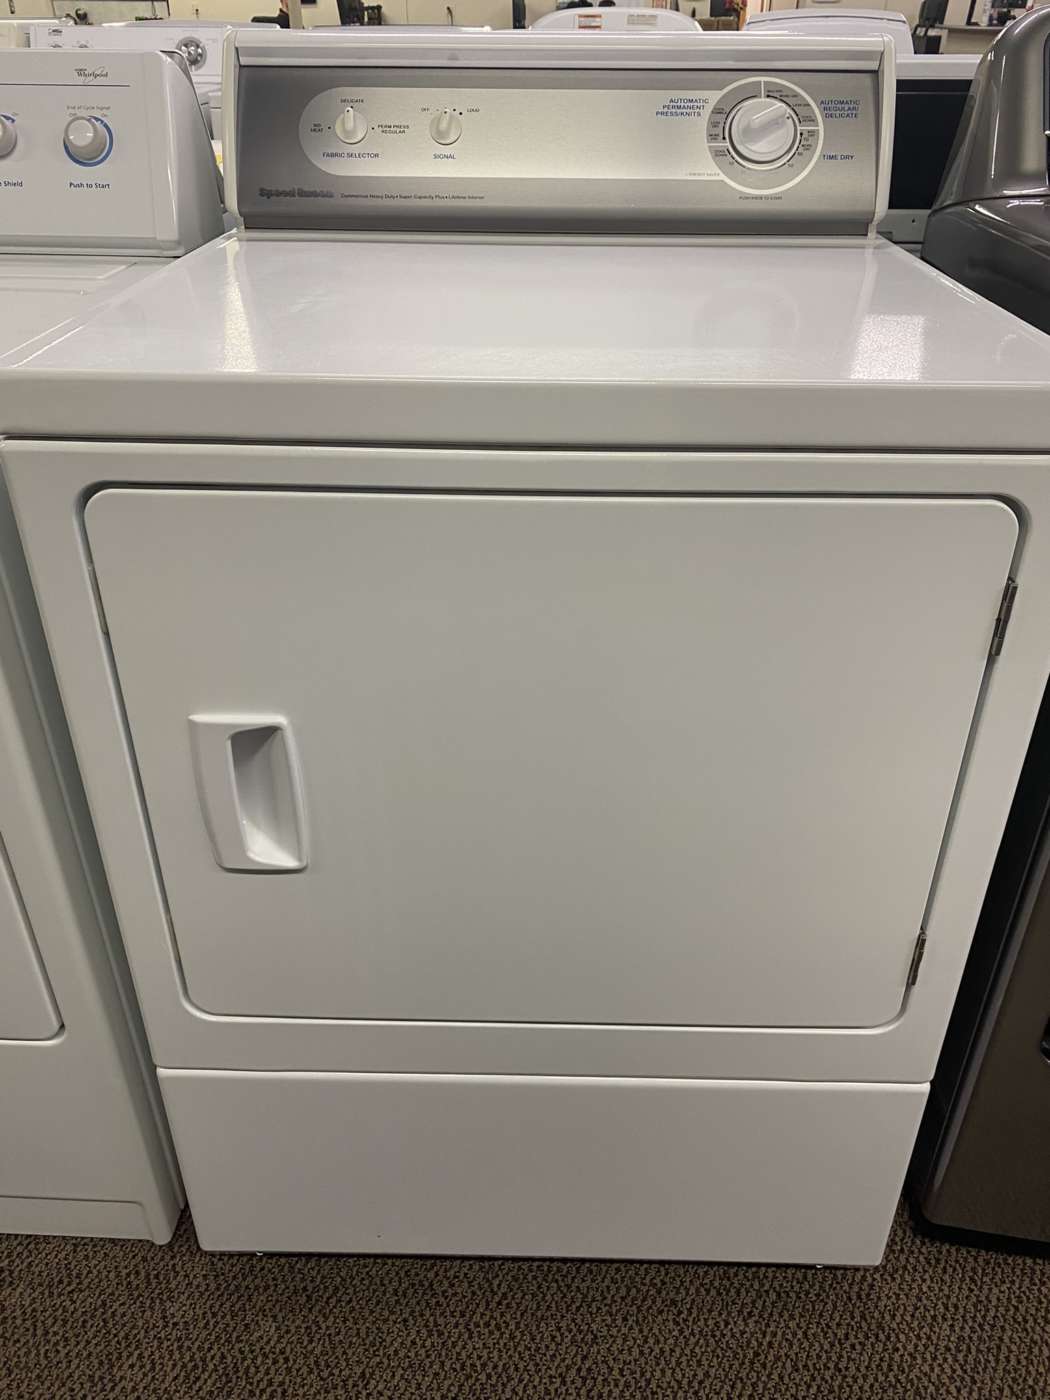 Reconditioned SPEED QUEEN 7.0 Cu. Ft. Electric Dryer – White